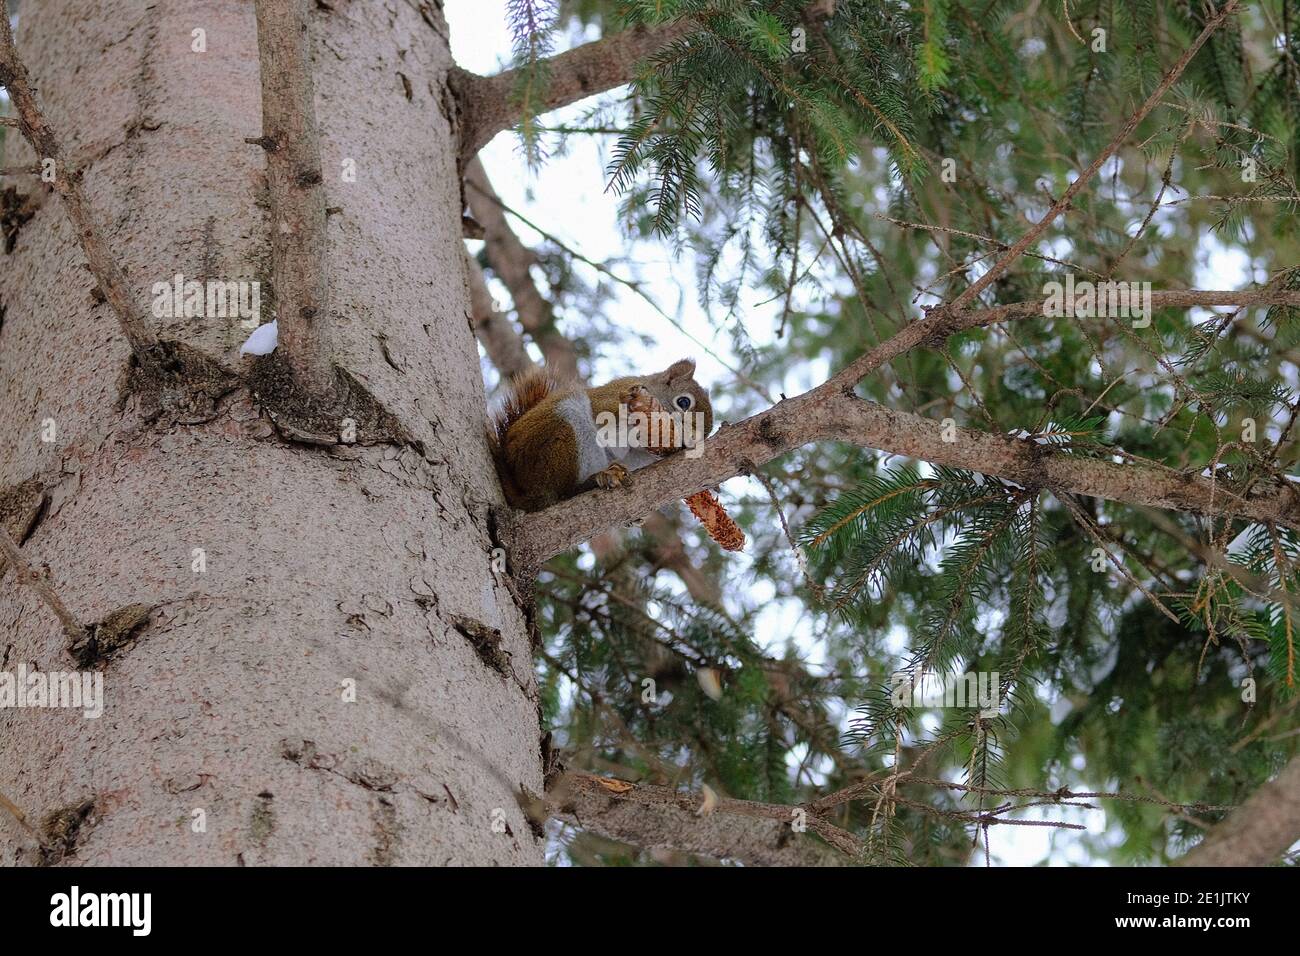 American red squirrel (Tamiasciurus hudsonicus) on a pine tree branch feasting on a pine cone in winter. Ottawa, Ontario, Canada. Stock Photo